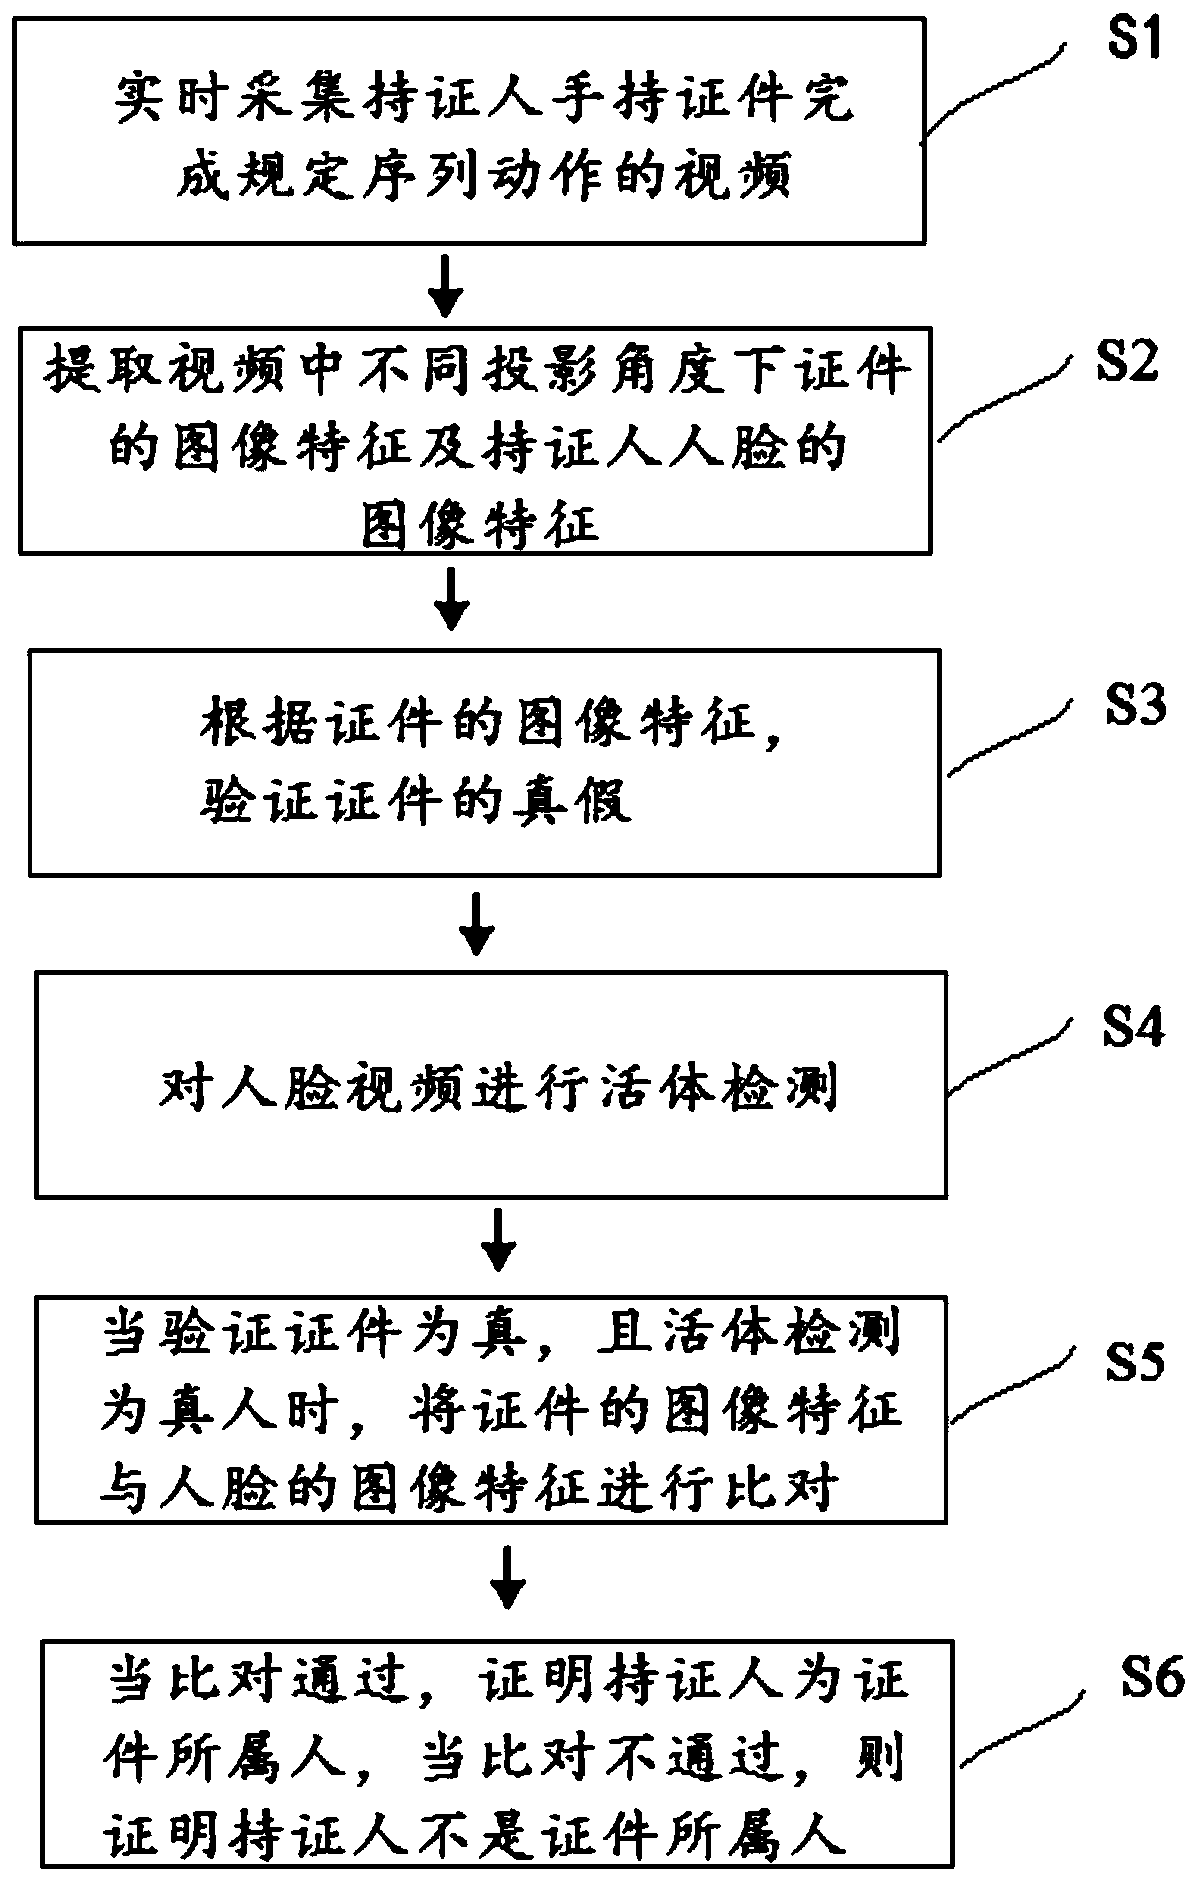 Method and system for verifying certificate and certificate holder